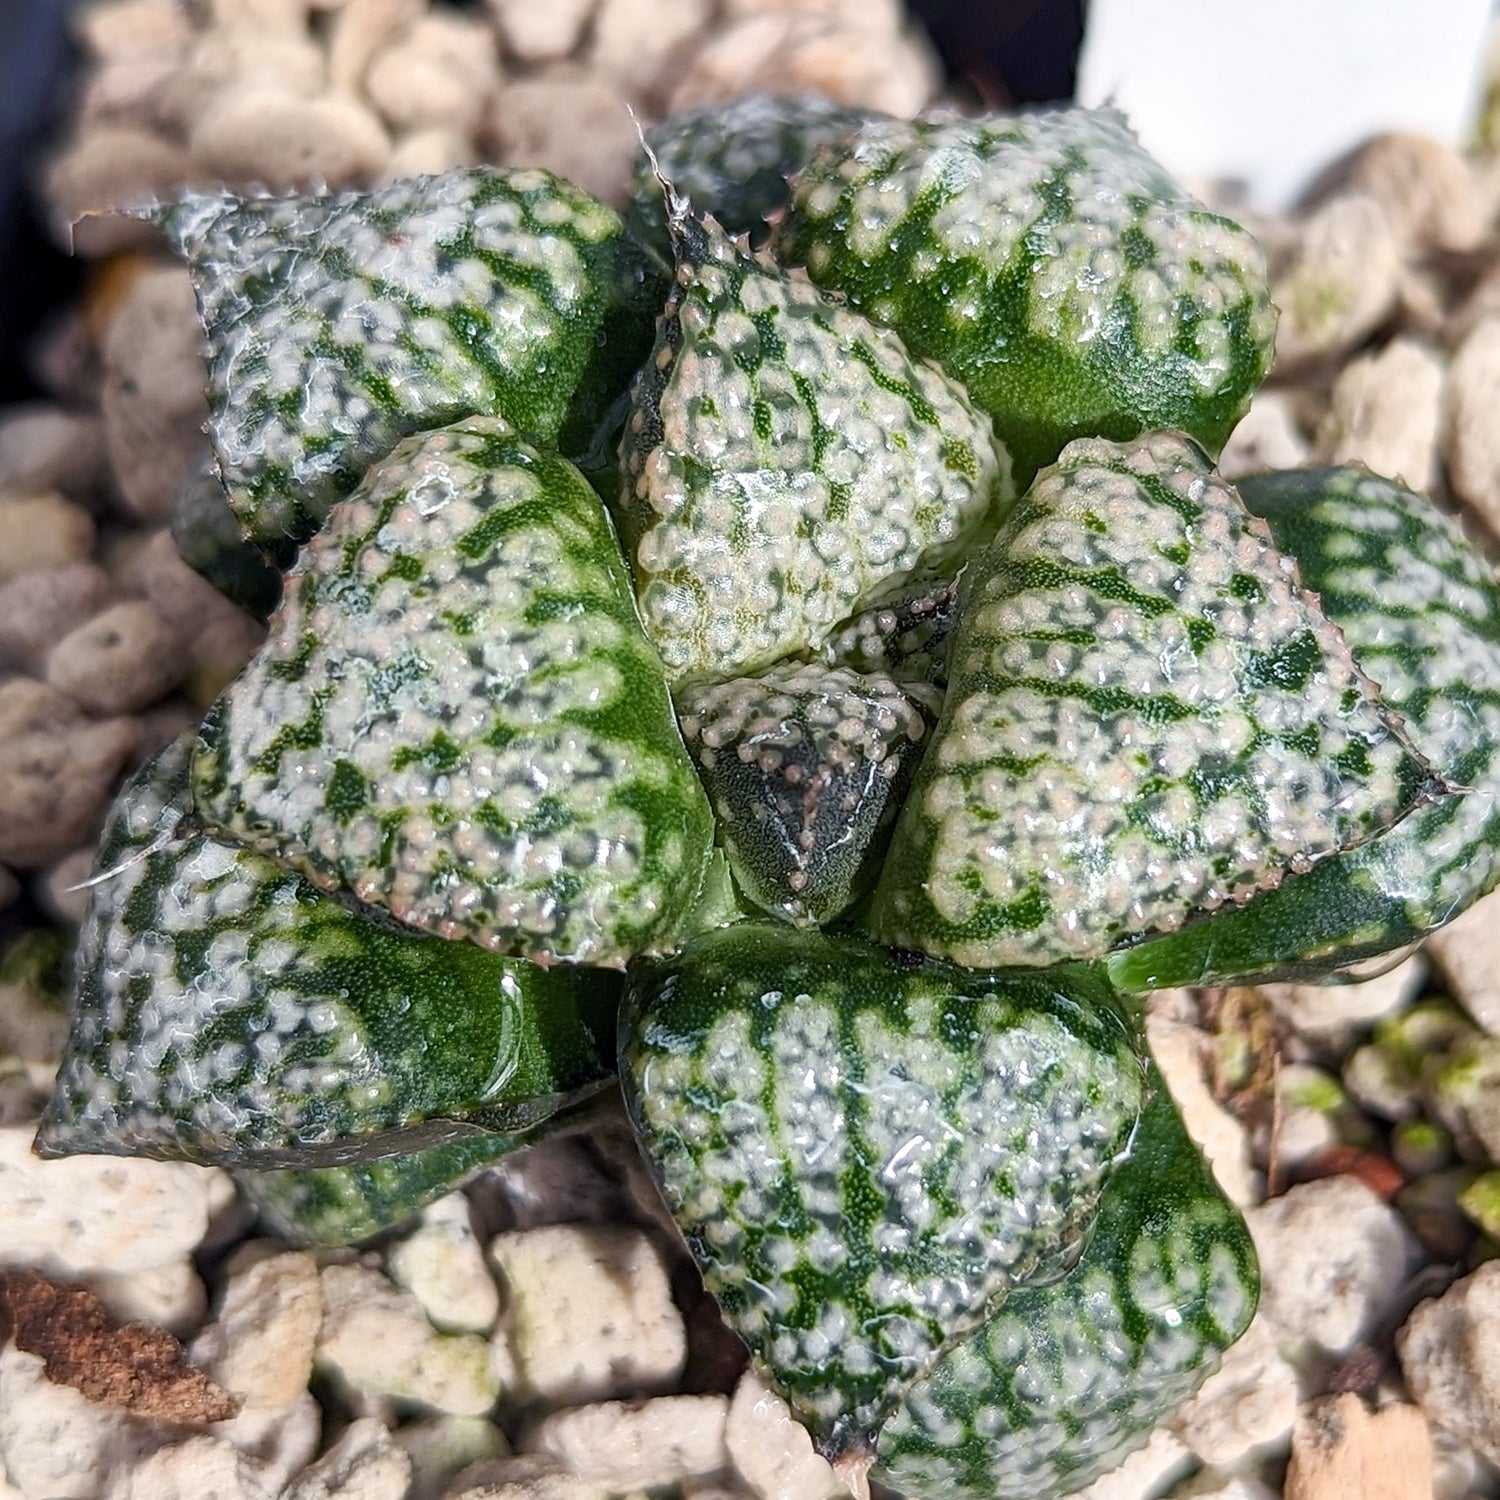 Haworthia "PP331" picta x Empress hybrid series #8 SOLD OUT